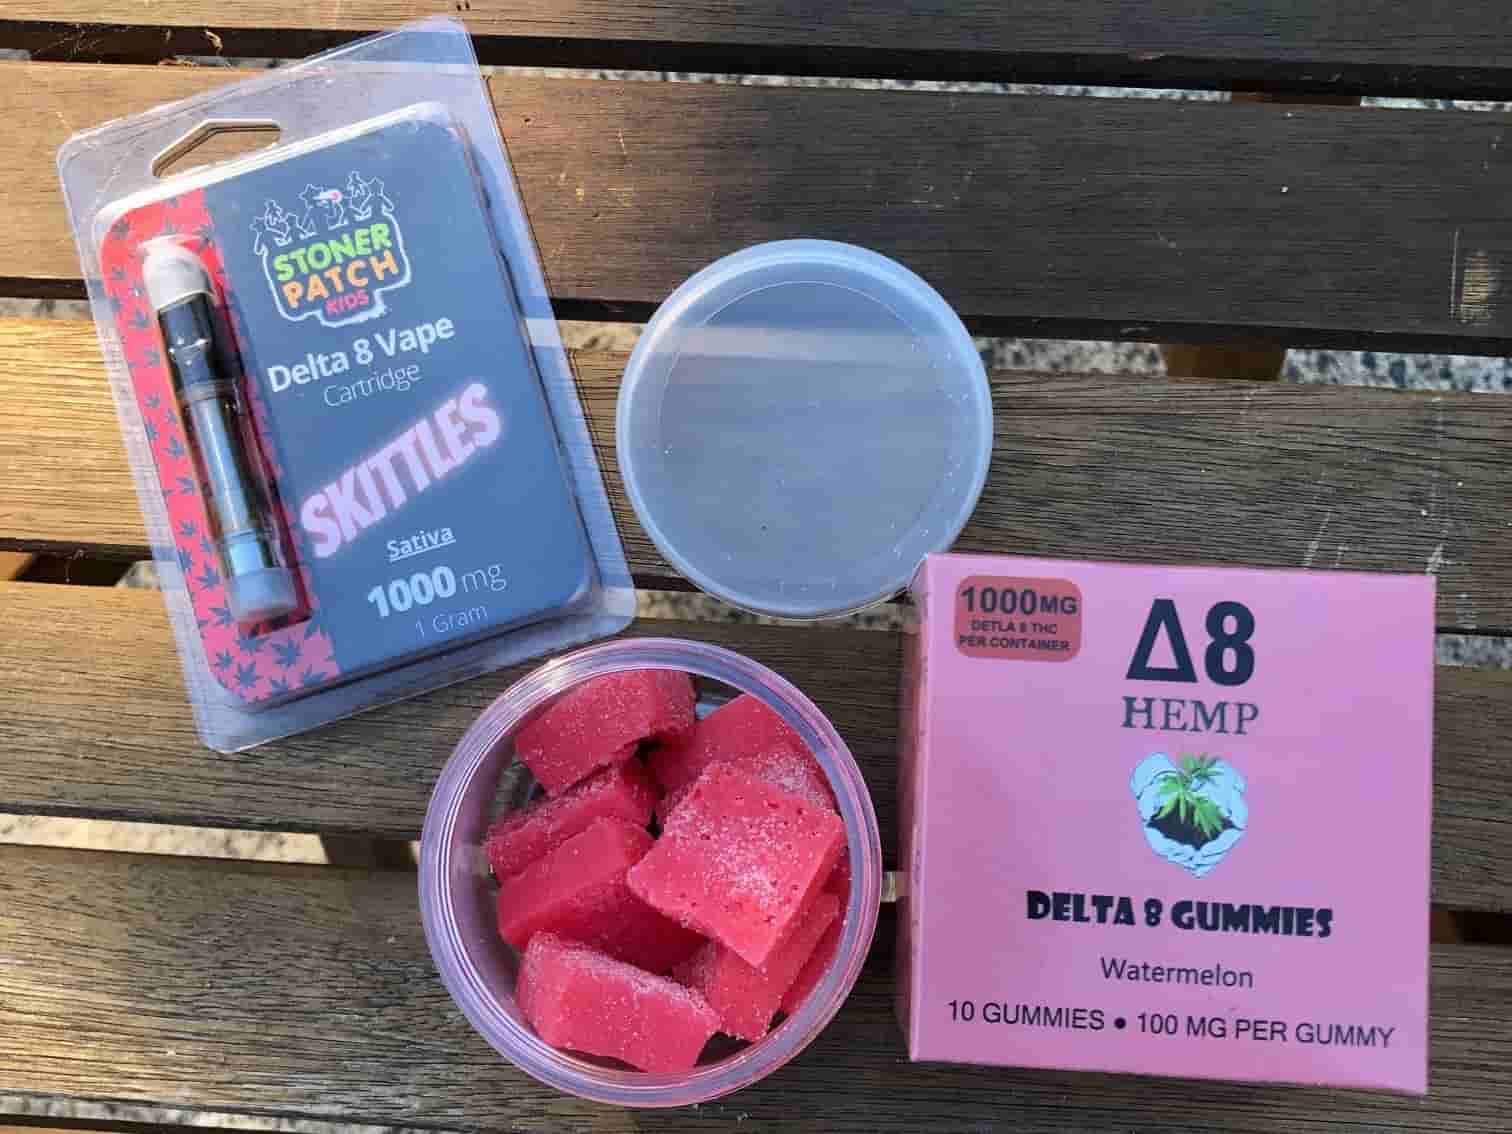 BEST DELTA 8 THC VAPE - Gummies|Thc|Products|Hemp|Product|Brand|Effects|Delta|Gummy|Cbd|Origin|Quality|Dosage|Delta-8|Dose|Usasource|Flavors|Brands|Ingredients|Range|Customers|Edibles|Cartridges|Reviews|Side|List|Health|Cannabis|Lab|Customer|Options|Benefits|Overviewproducts|Research|Time|Market|Drug|Farms|Party|People|Delta-8 Thc|Delta-8 Products|Delta-9 Thc|Delta-8 Gummies|Delta-8 Thc Products|Delta-8 Brands|Customer Reviews|Brand Overviewproducts|Drug Tests|Free Shipping|Similar Benefits|Vape Cartridges|Hemp Doctor|United States|Third Party Lab|Drug Test|Thc Edibles|Health Canada|Cannabis Plant|Side Effects|Organic Hemp|Diamond Cbd|Reaction Time|Legal Hemp|Psychoactive Effects|Psychoactive Properties|Third Party|Dry Eyes|Delta-8 Market|Tolerance Level